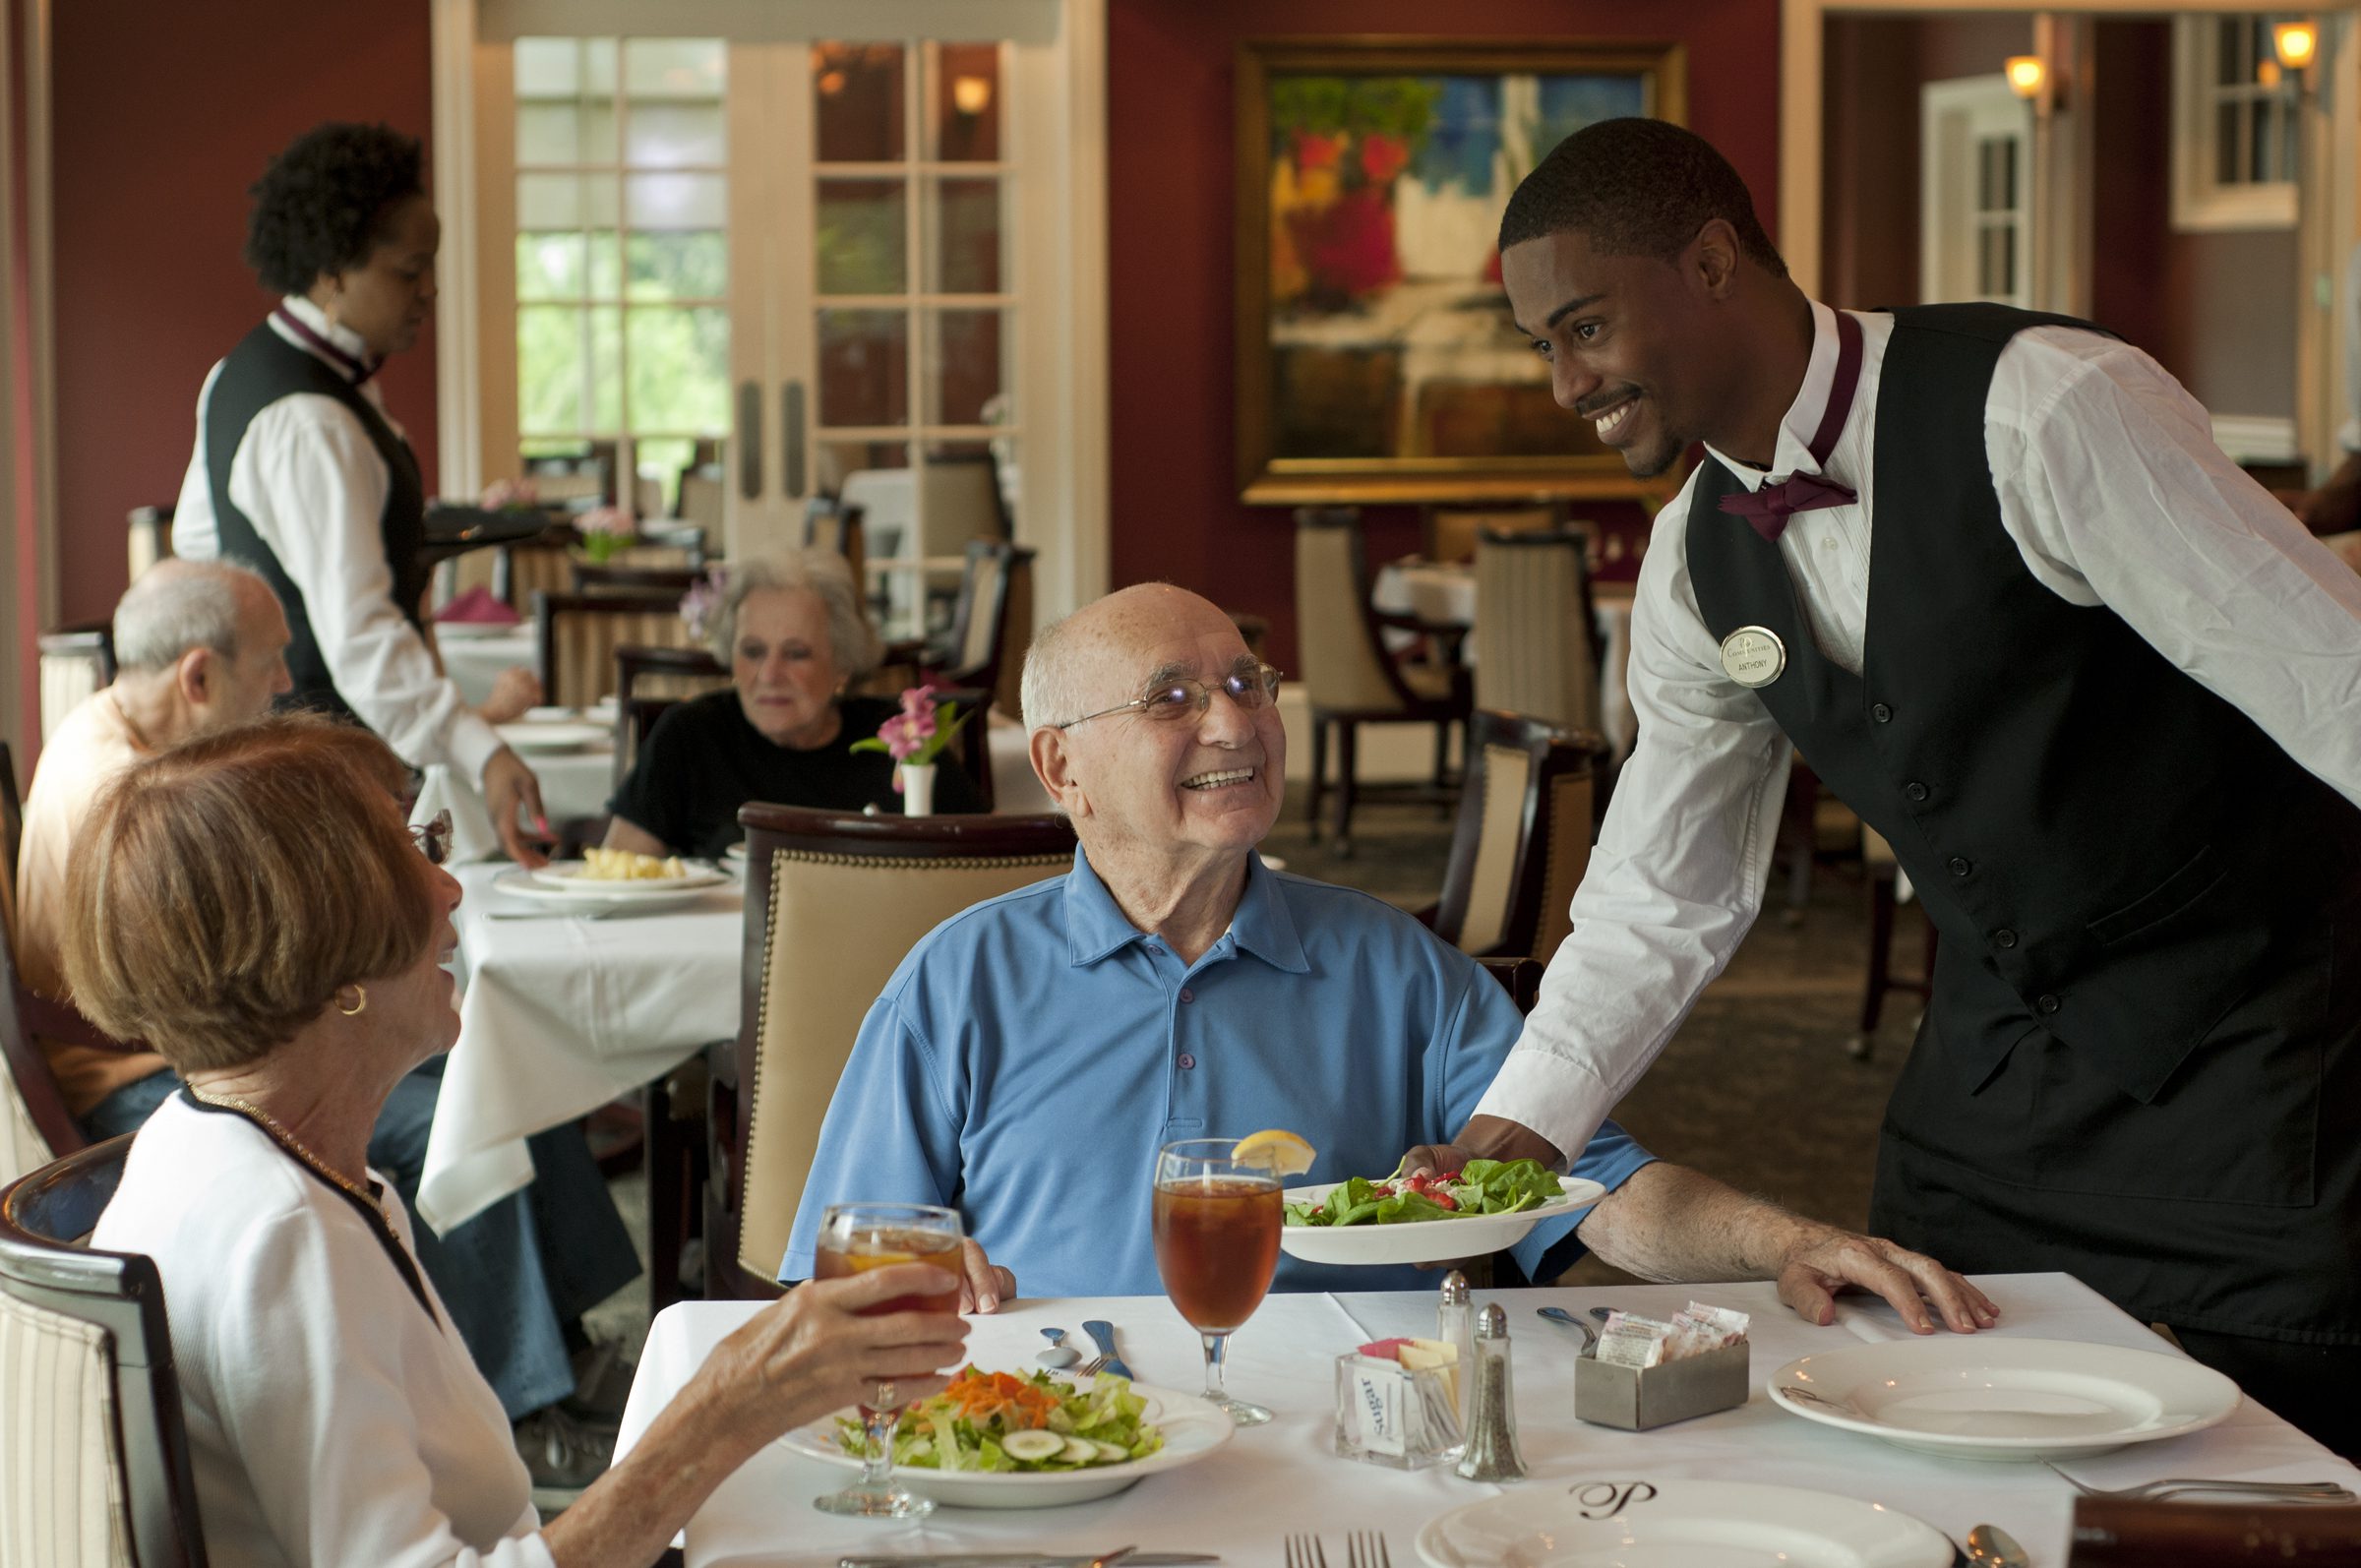 A waiter attentively serves an elderly man at a restaurant, ensuring a pleasant dining experience for the customer.